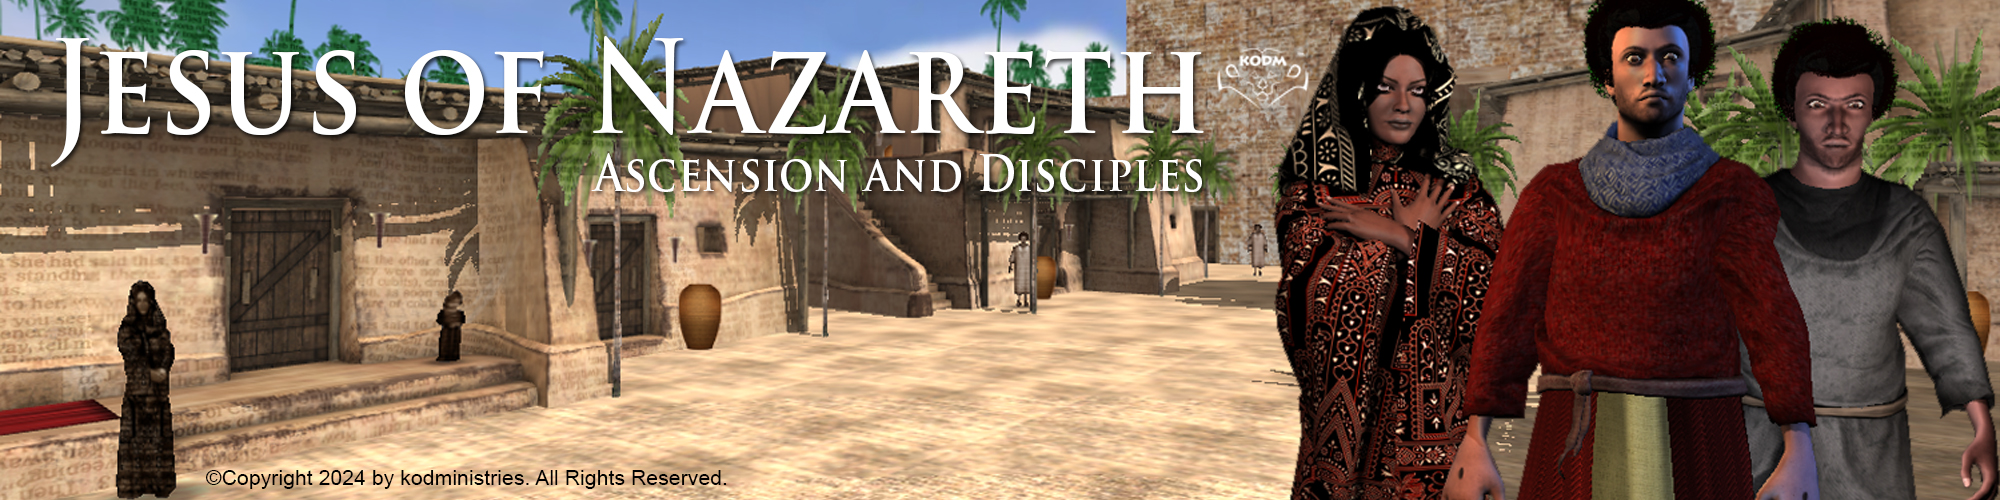 Jesus of Nazareth: Ascension and Disciples